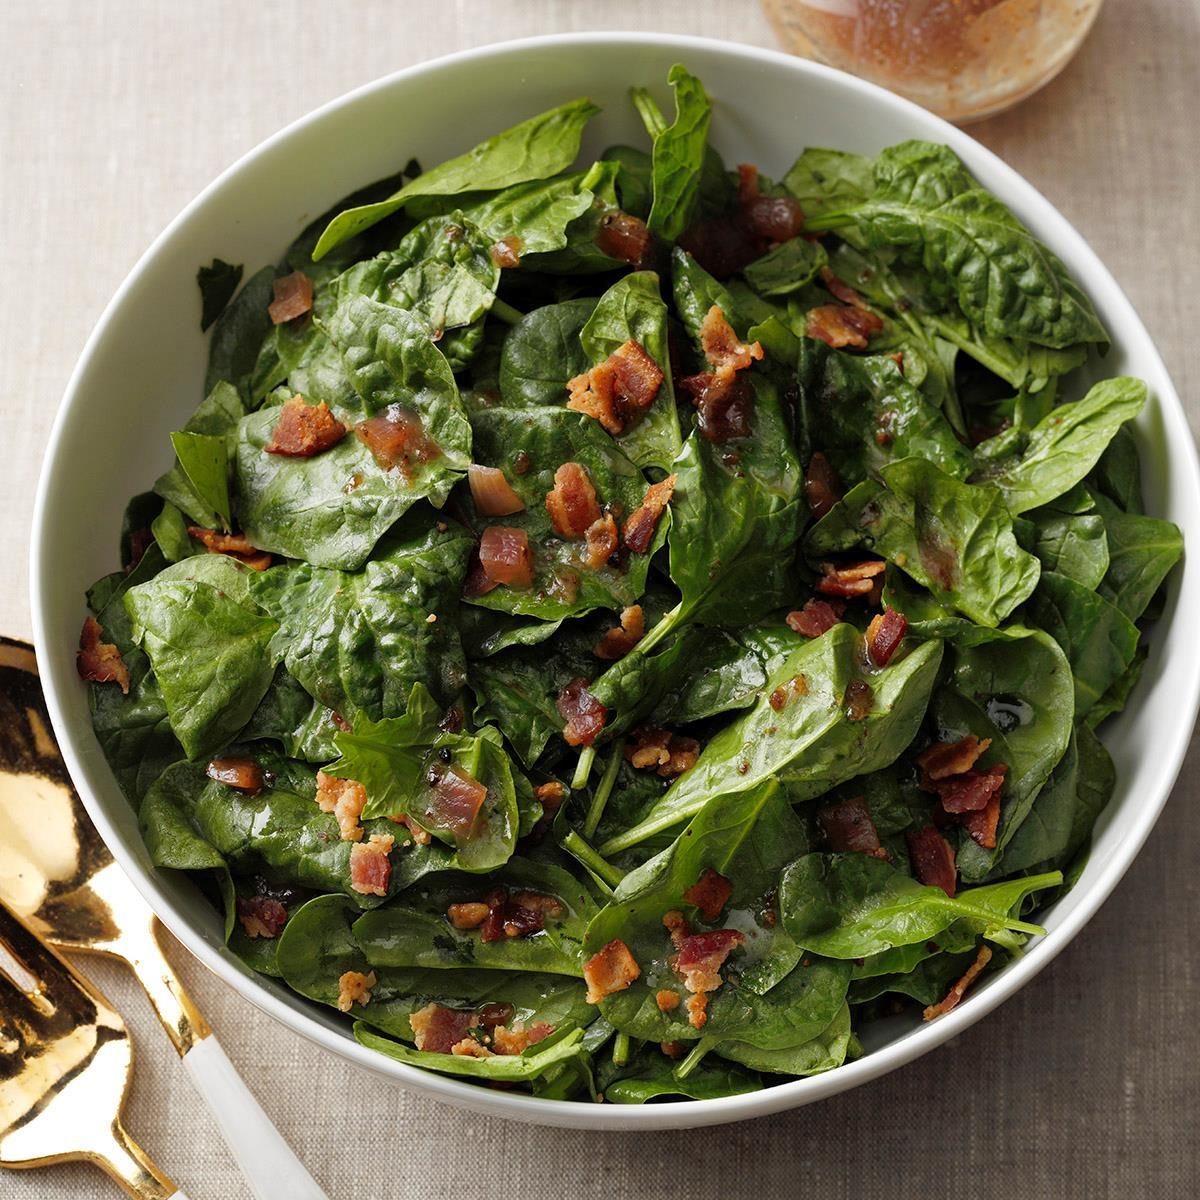 https://www.tasteofhome.com/wp-content/uploads/2018/01/Hearty-Spinach-Salad-with-Hot-Bacon-Dressing_EXPS_THAM19_34327_B11_13_5b.jpg?fit=700%2C700